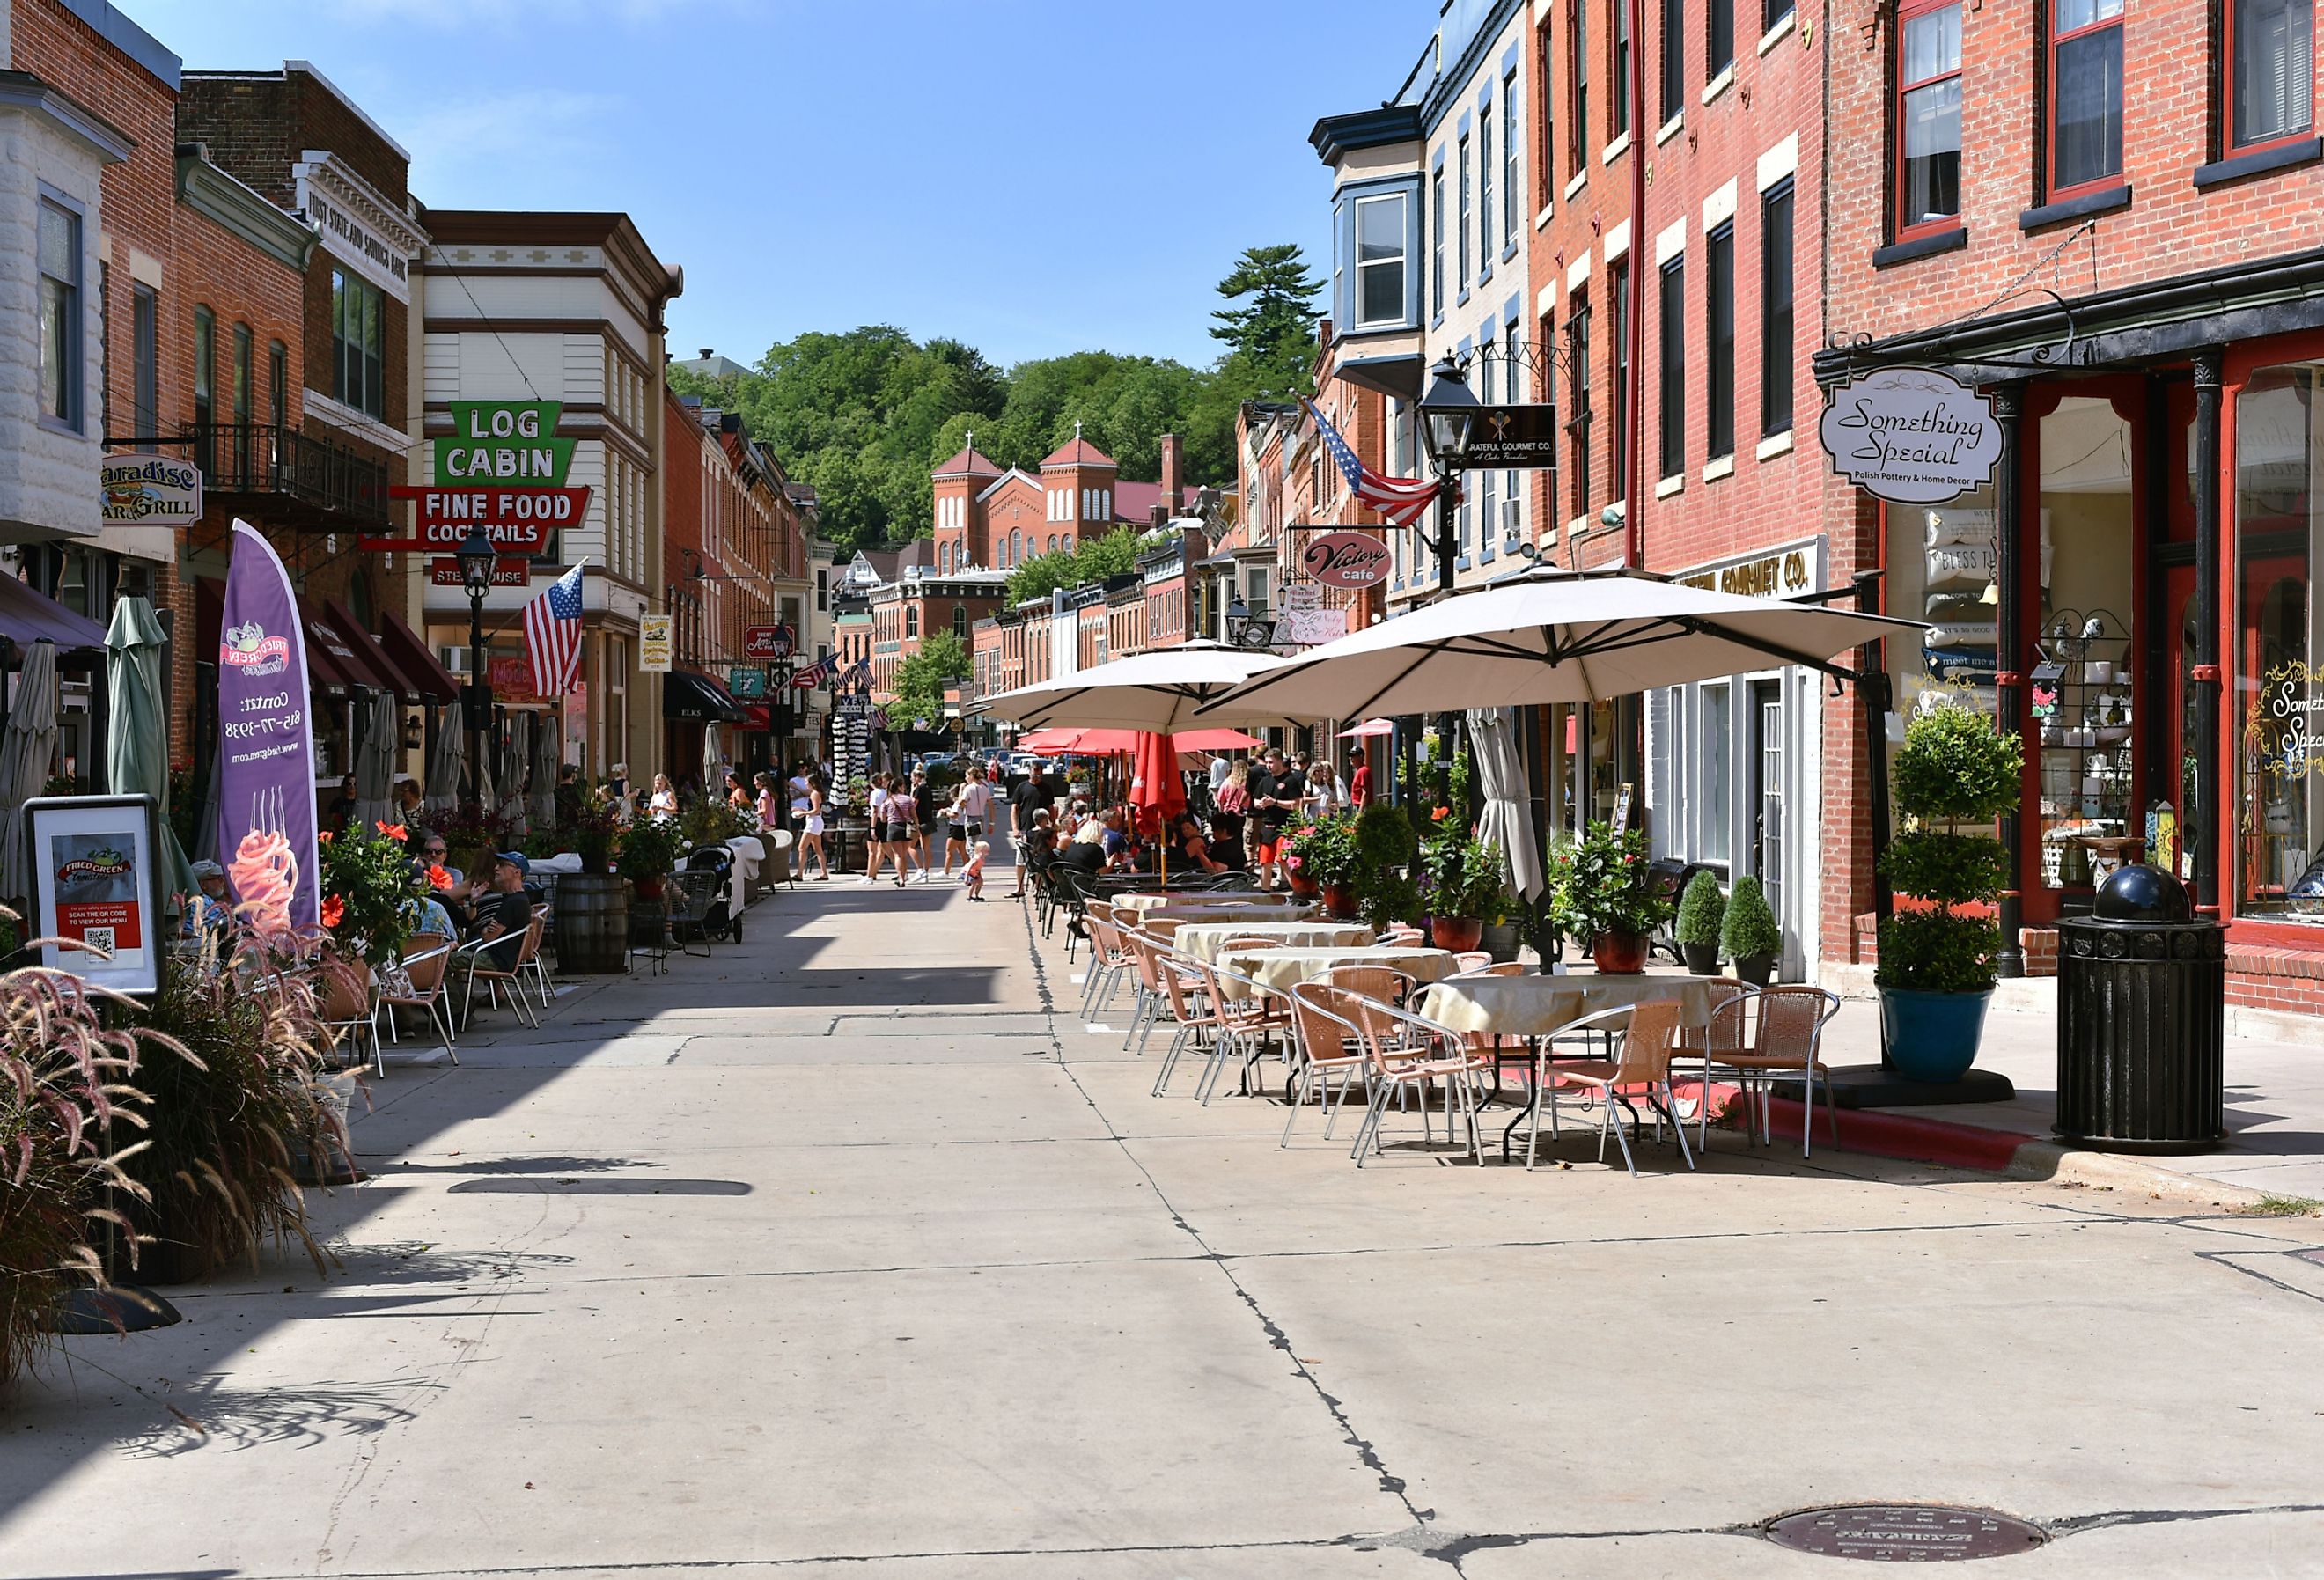 Part of downtown Galena with its shops and restaurants. Image credit Ben Harding via Shutterstock.